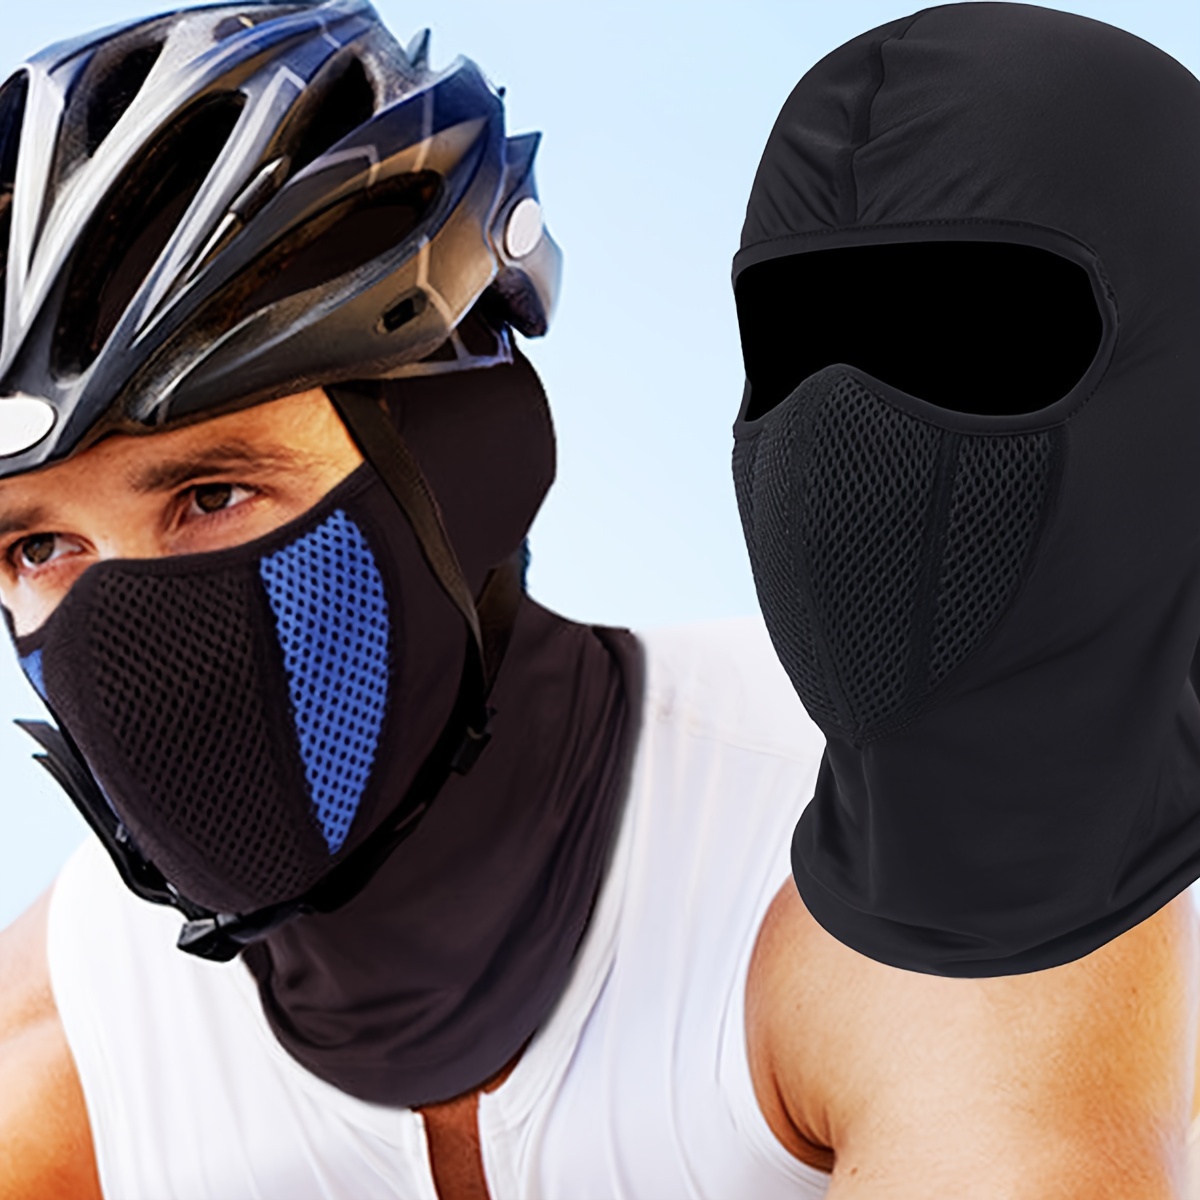 

Full Face Mask Hats Breathable For Men Women Balaclava Hood Helmet Liner Uv Protector Lightweight For Motorcycle Cycling Fishing Snowboard